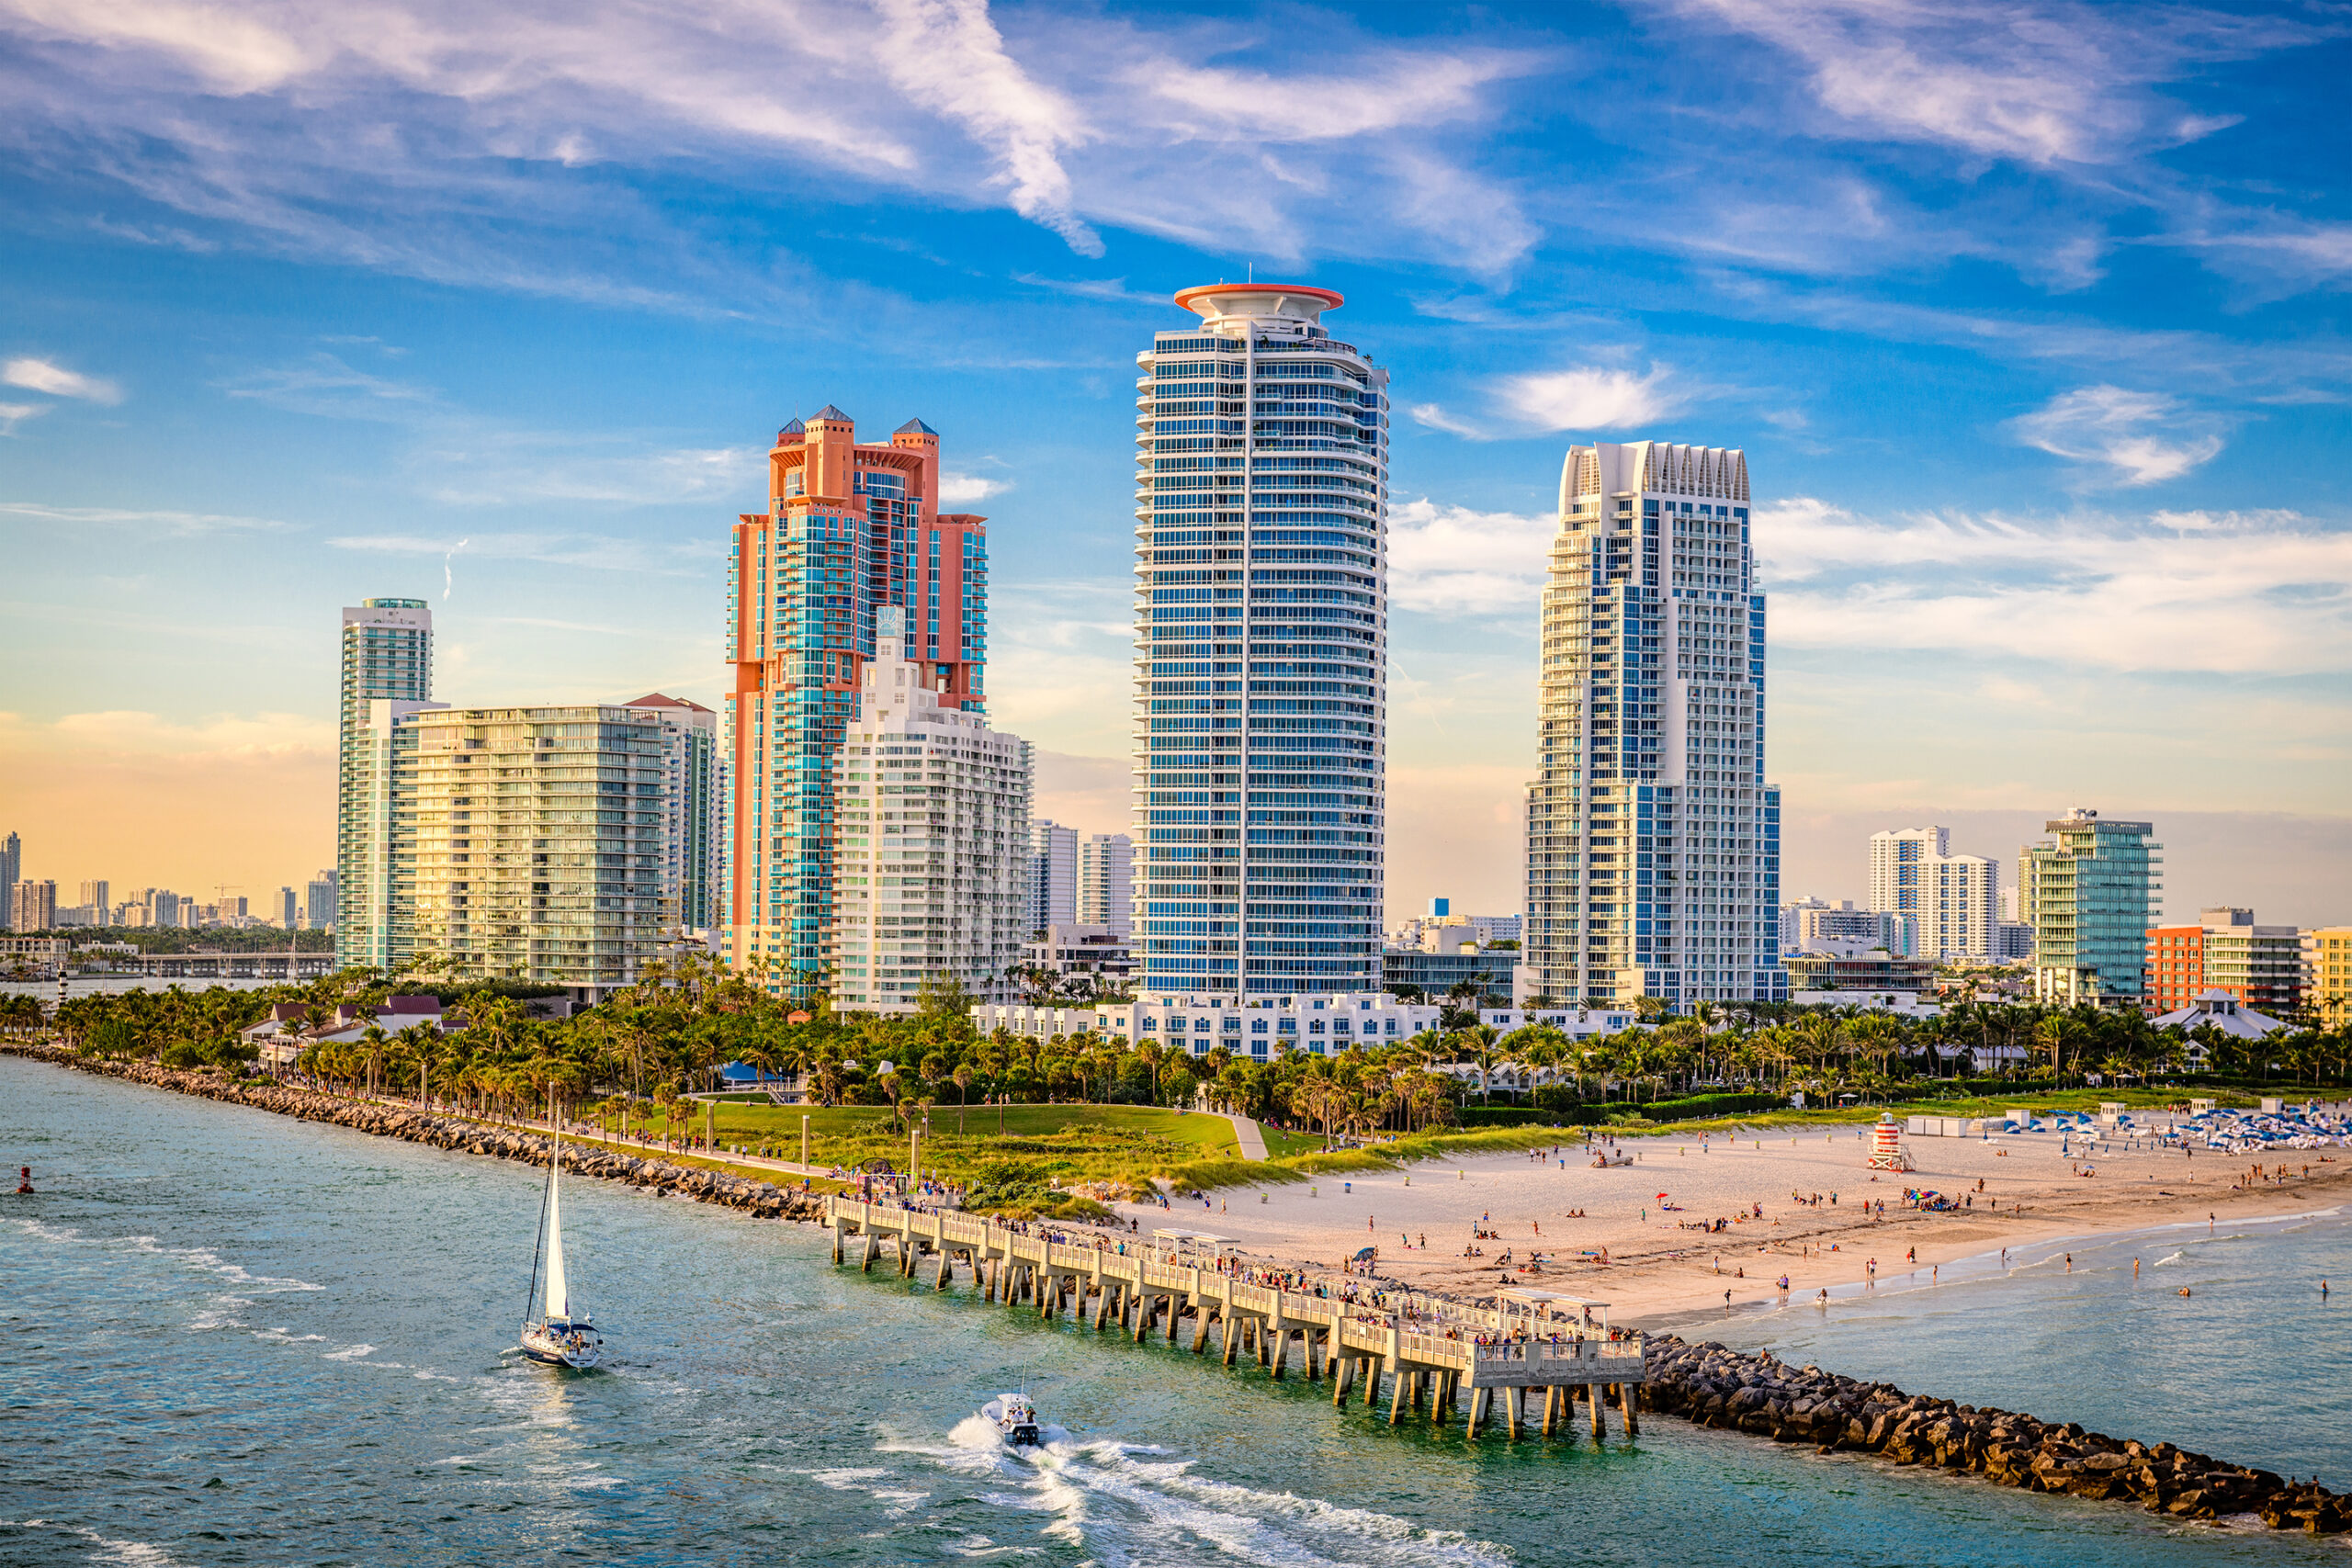 Florida usurps New York to become the 2nd most valuable real estate market, Zillow reports